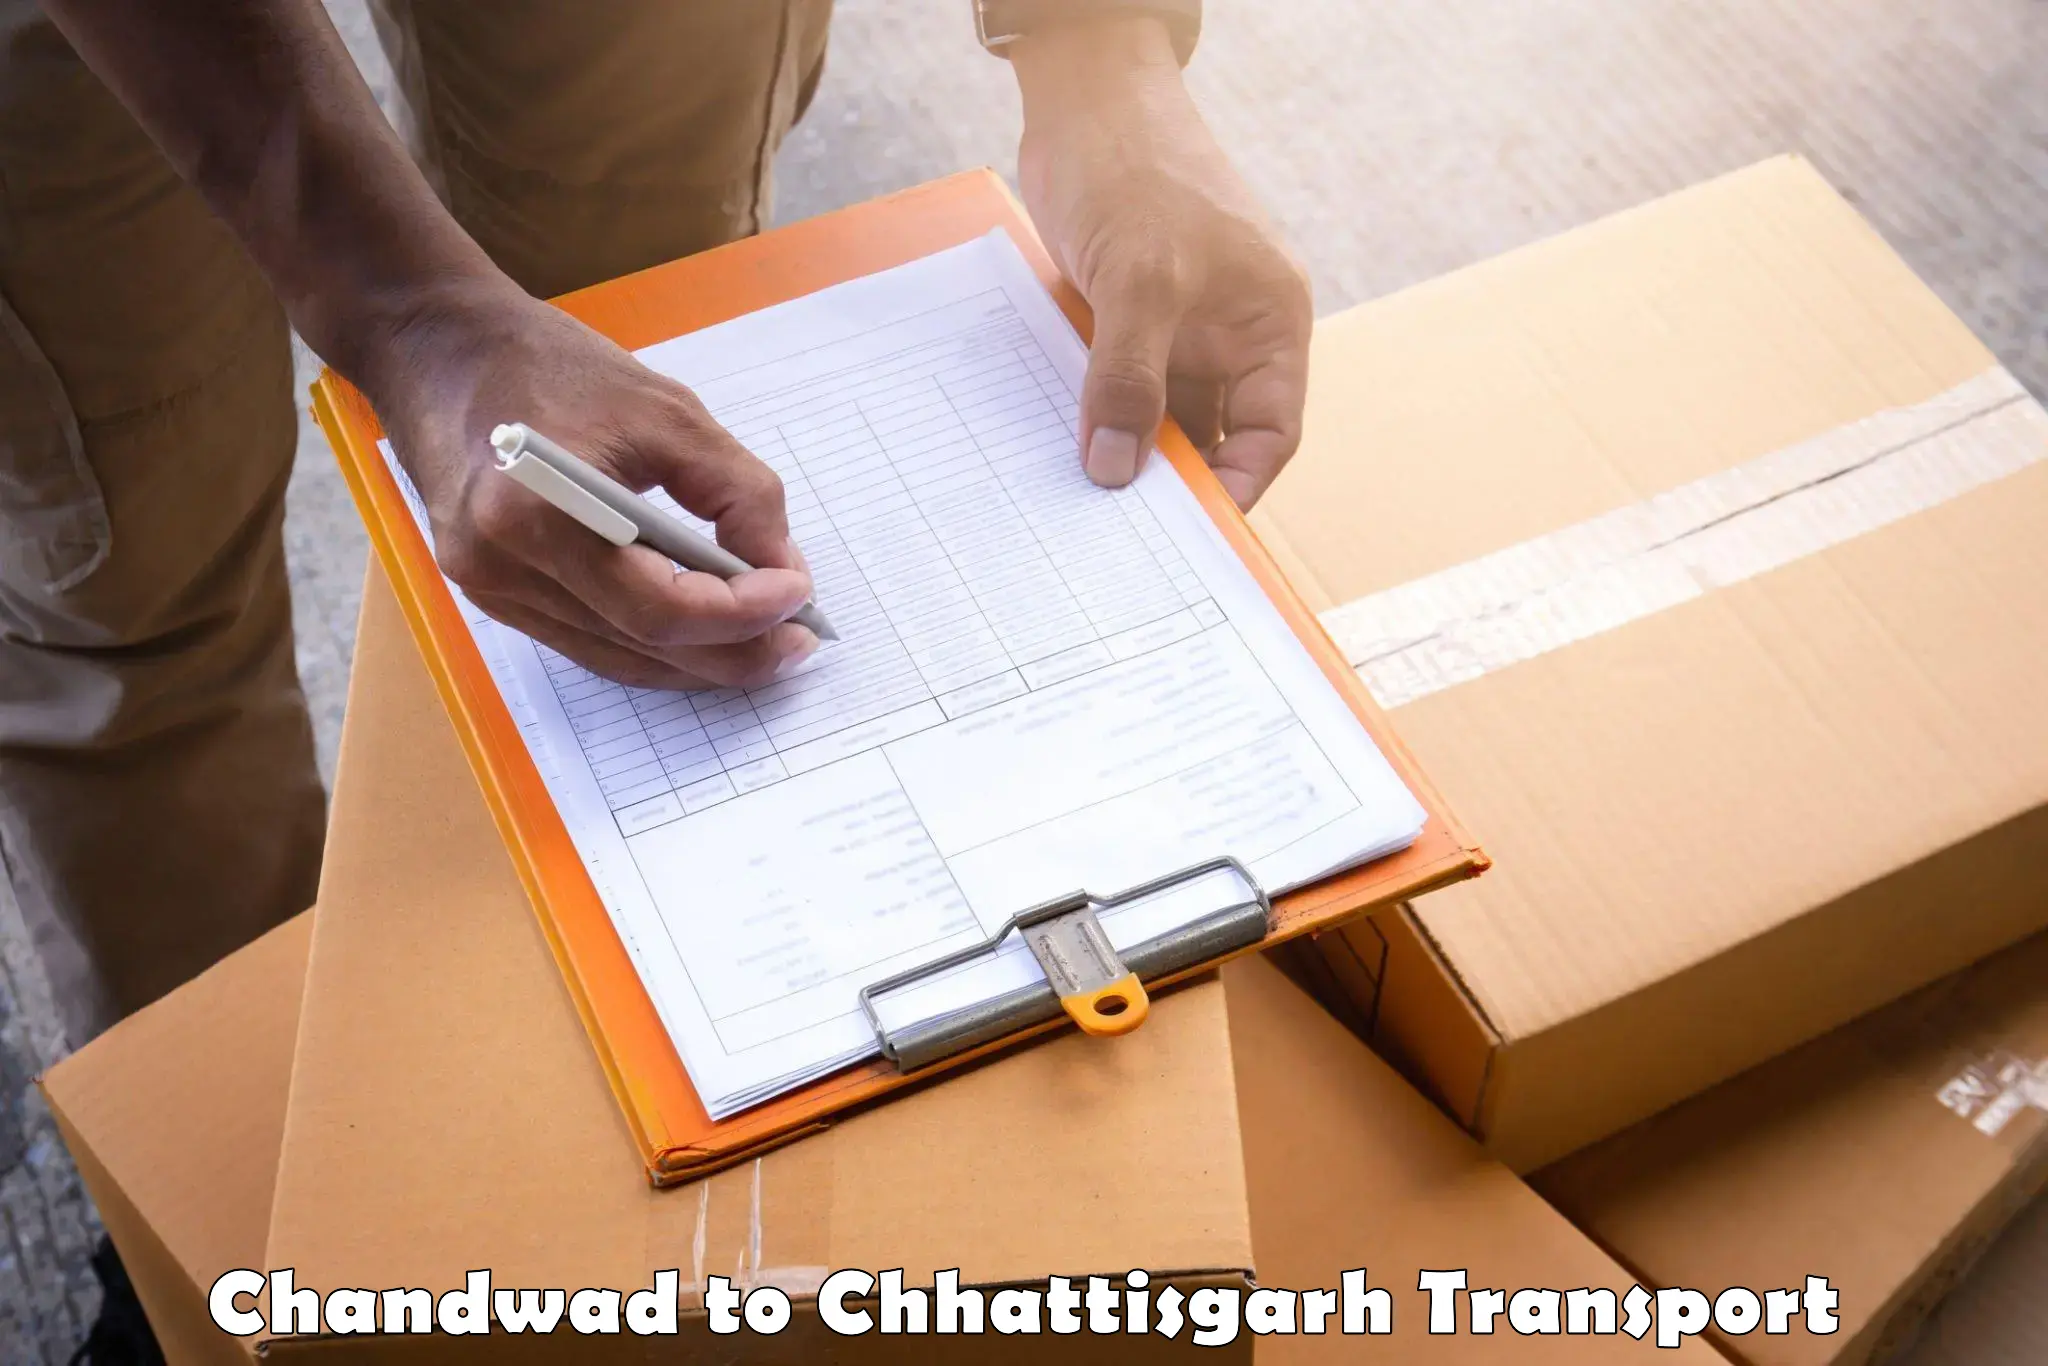 Container transport service Chandwad to Pithora